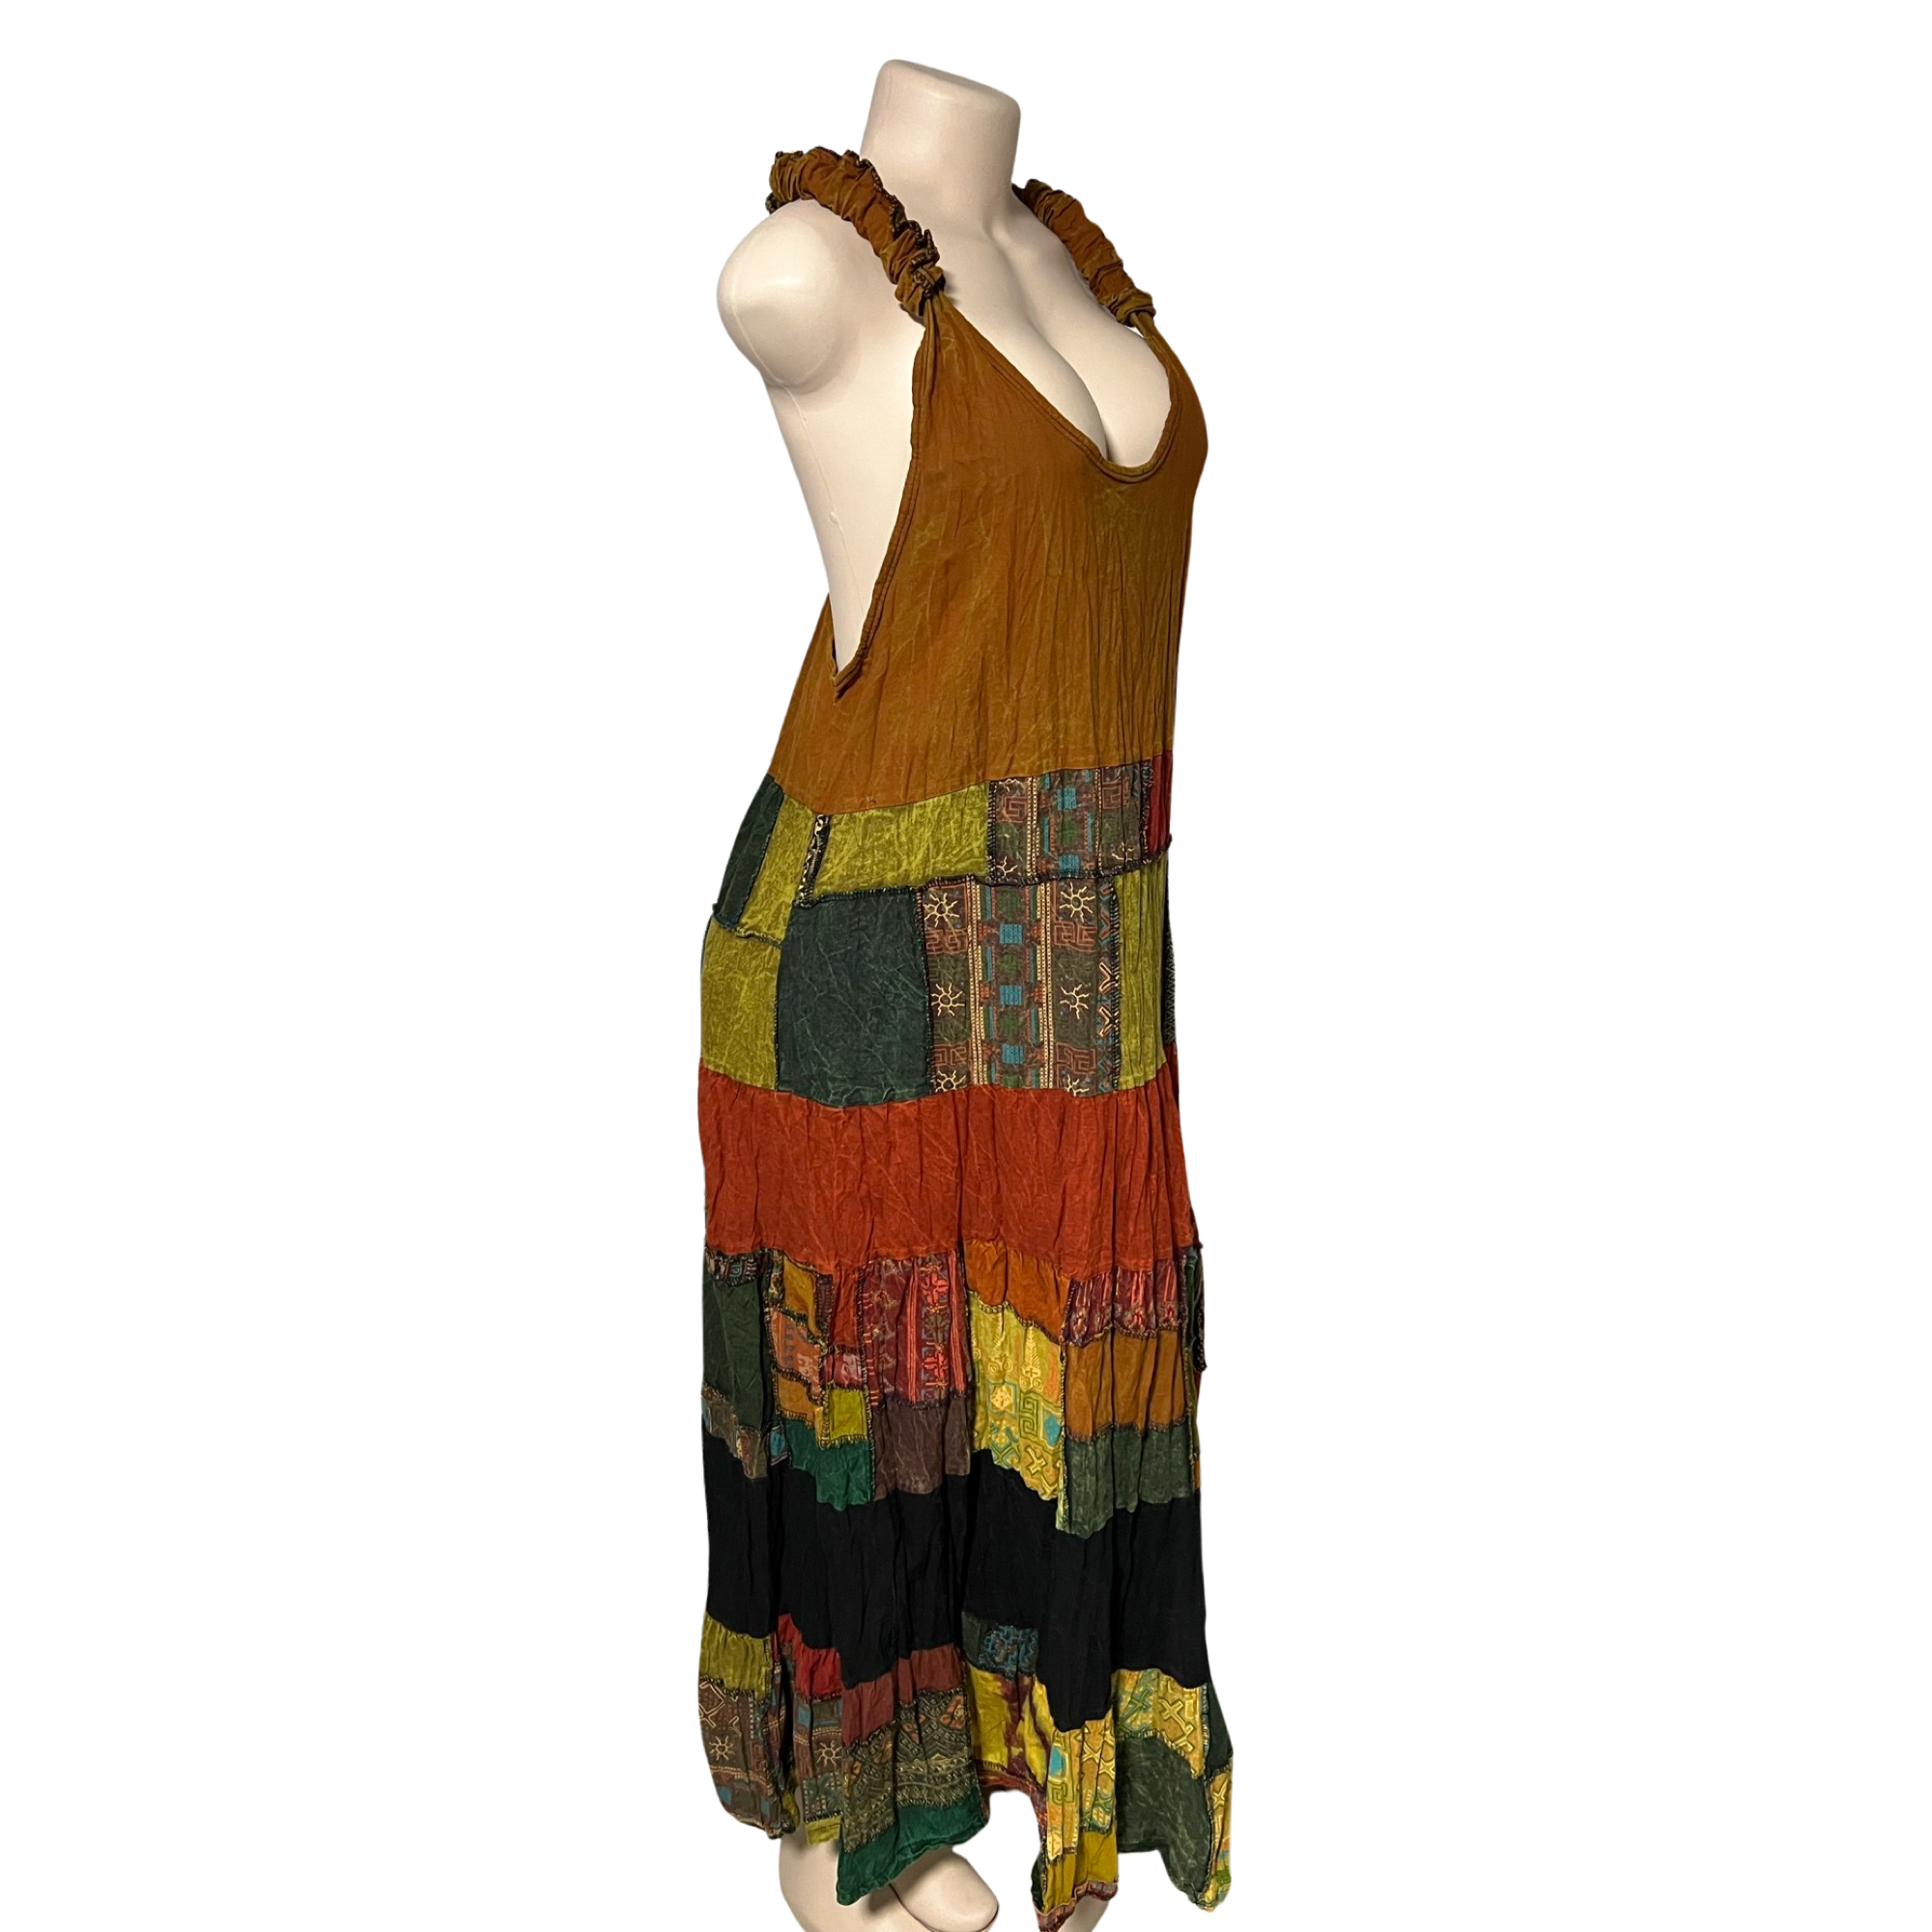 Patchwork Overall Maxi Cotton Dress W/Cross Back.